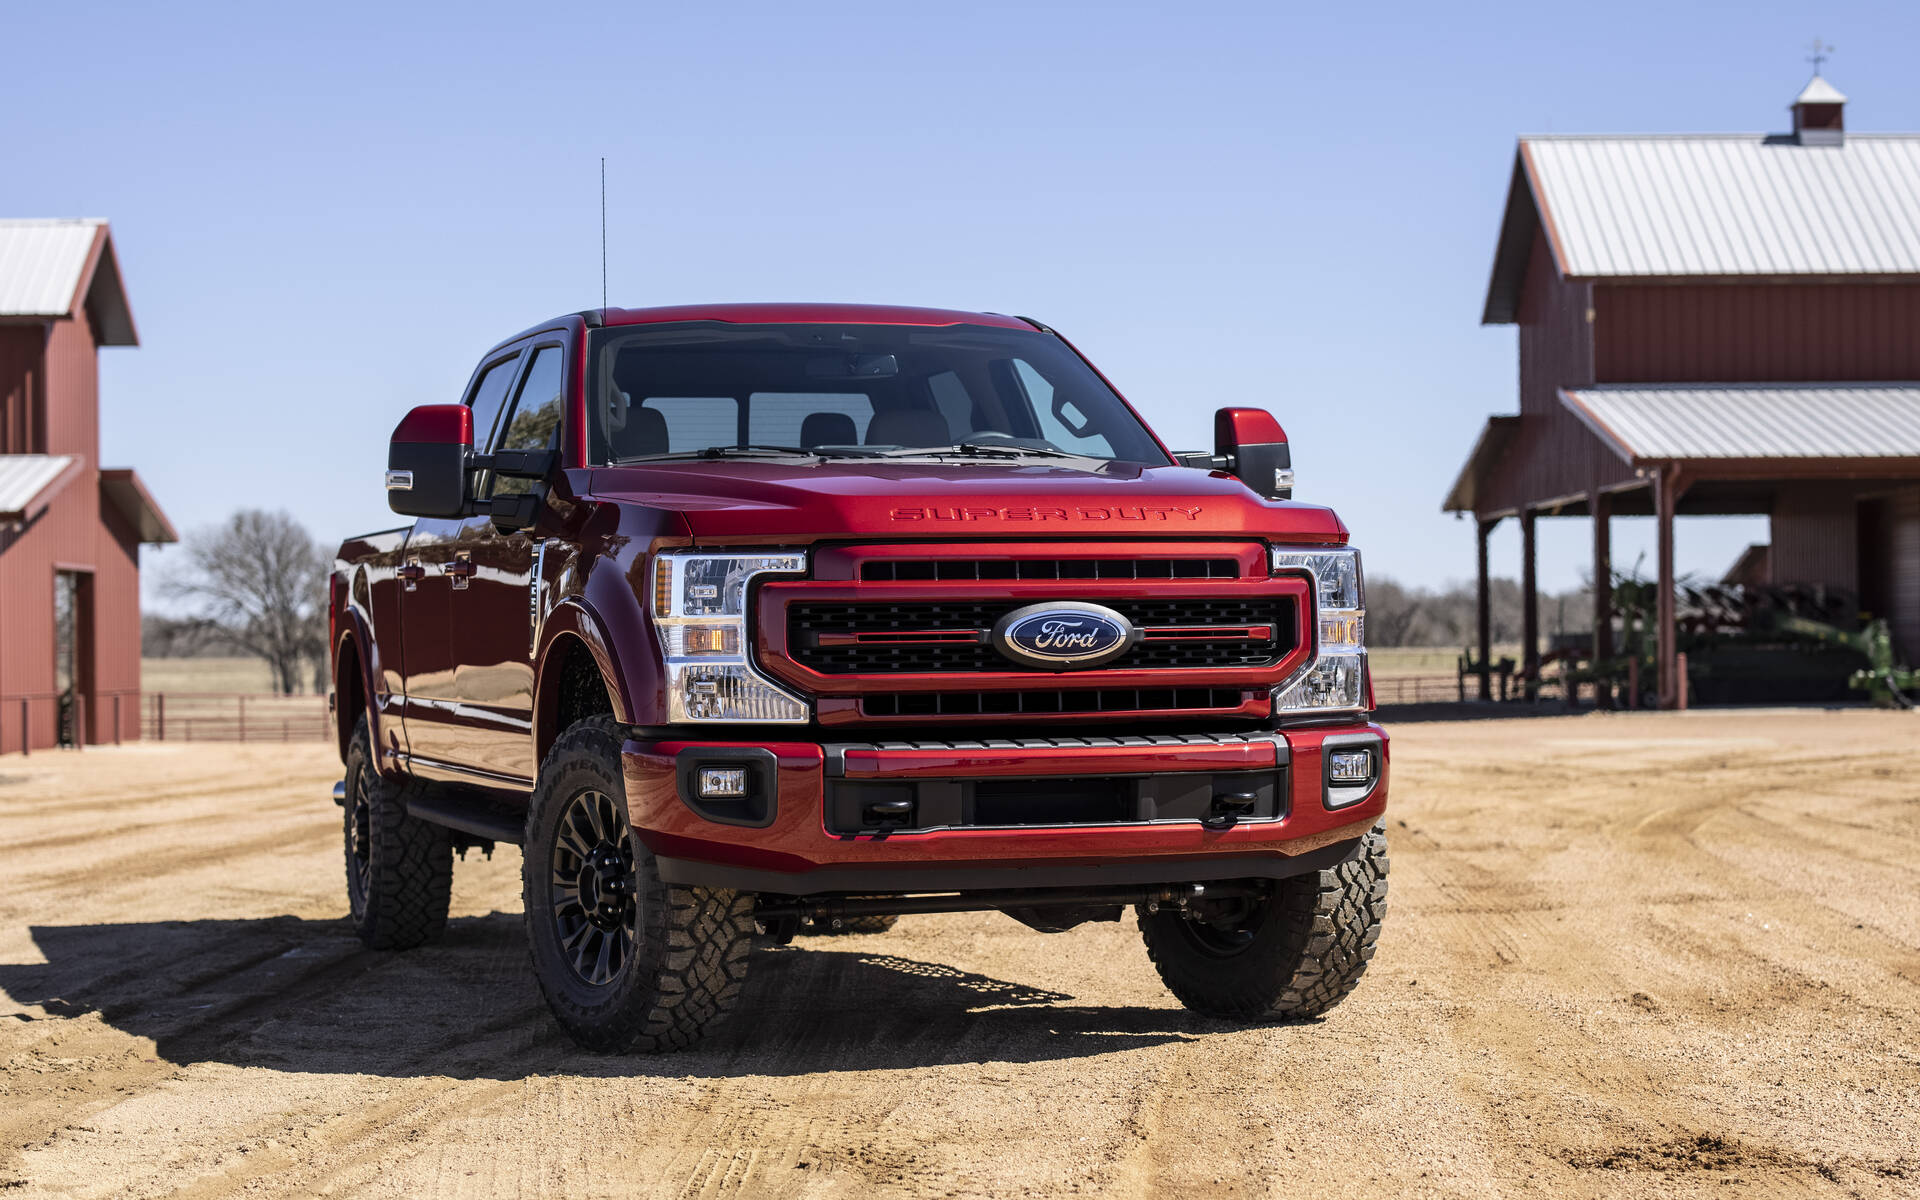 2022 Ford Super Duty Brings More Style, Tech to Class-leading Trucks